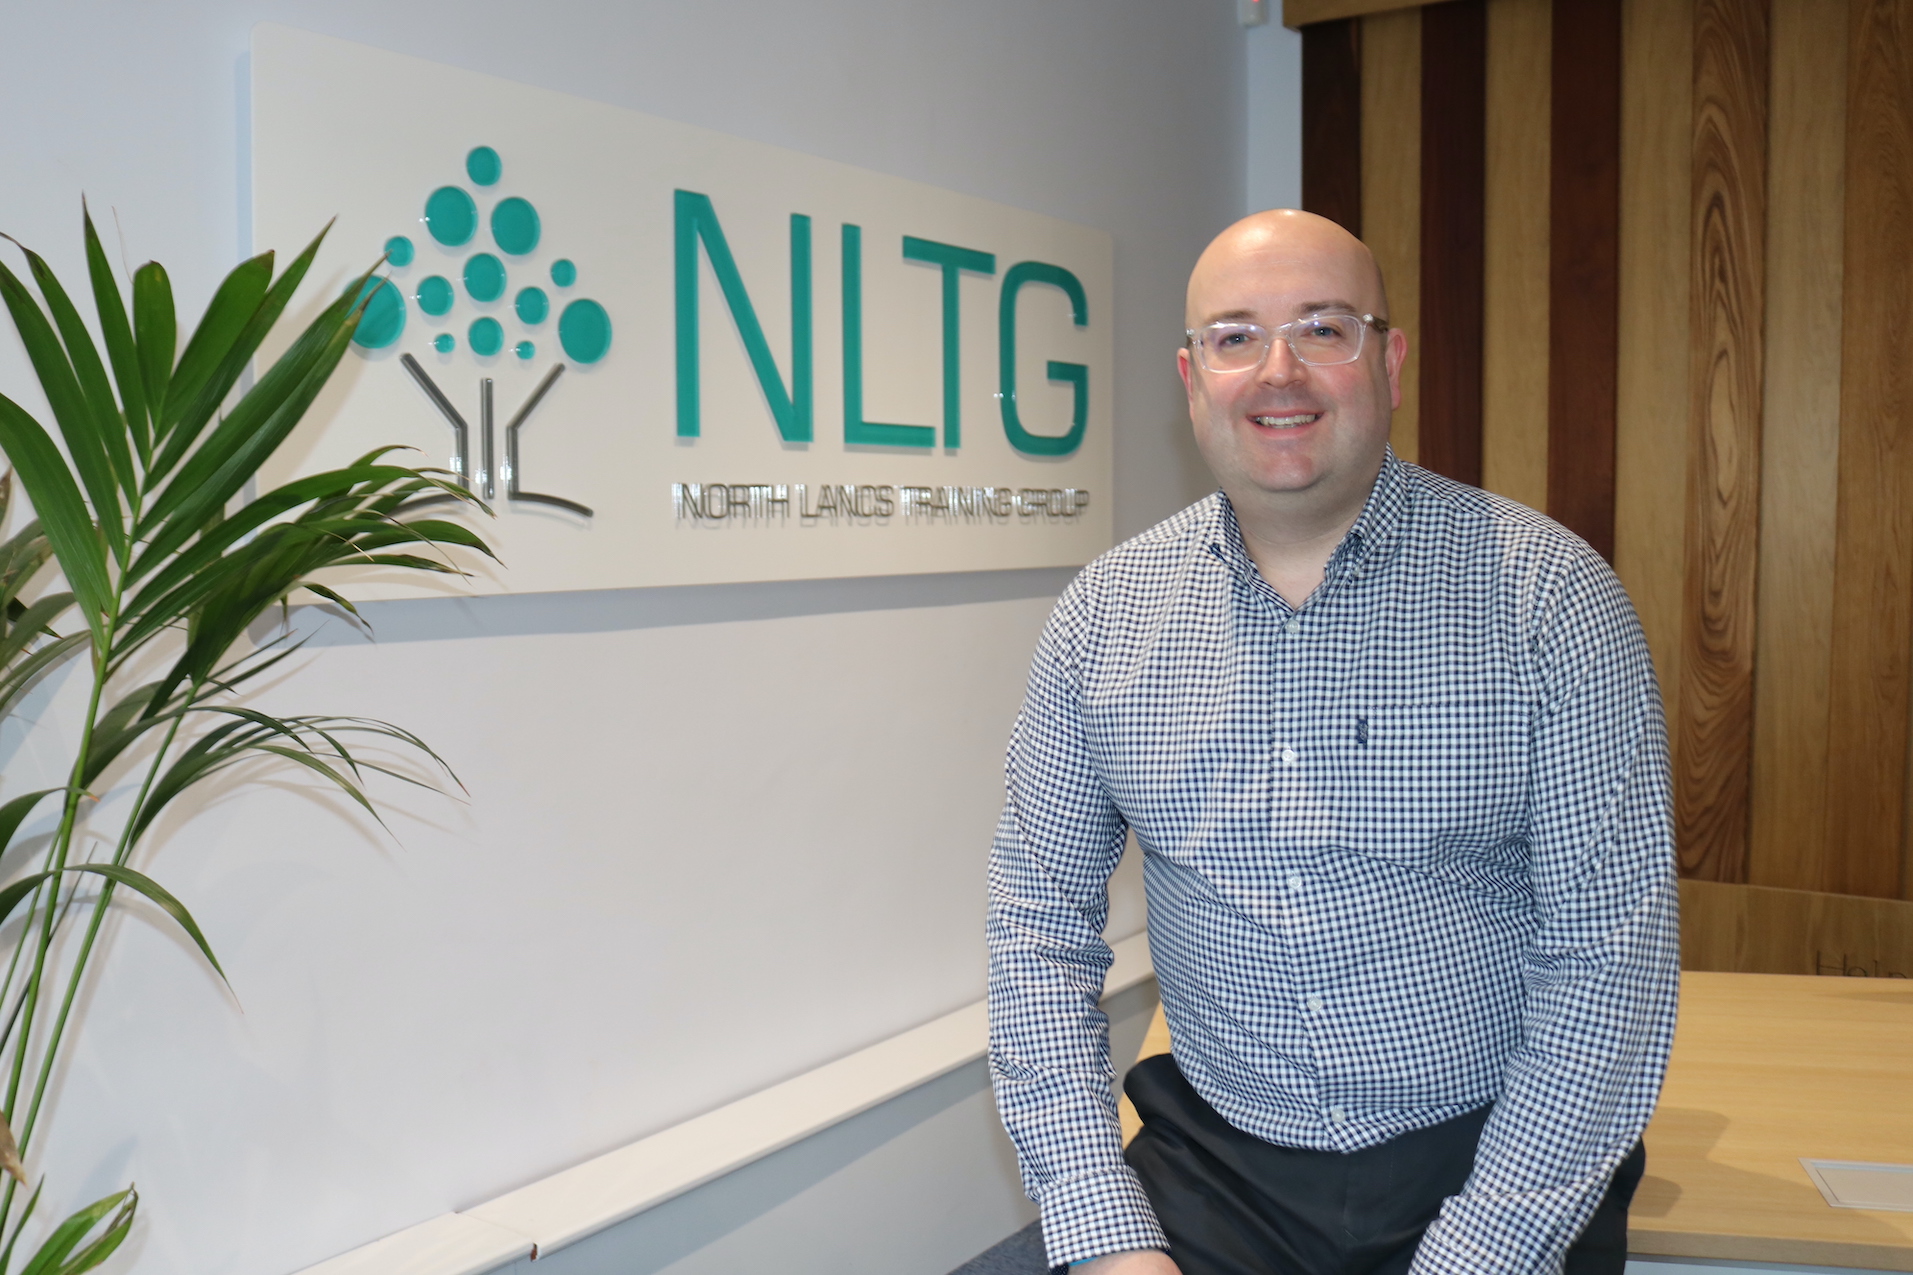 NLTG have strengthened their successful team by hiring Robin Lindsay as their new Operations Manager.